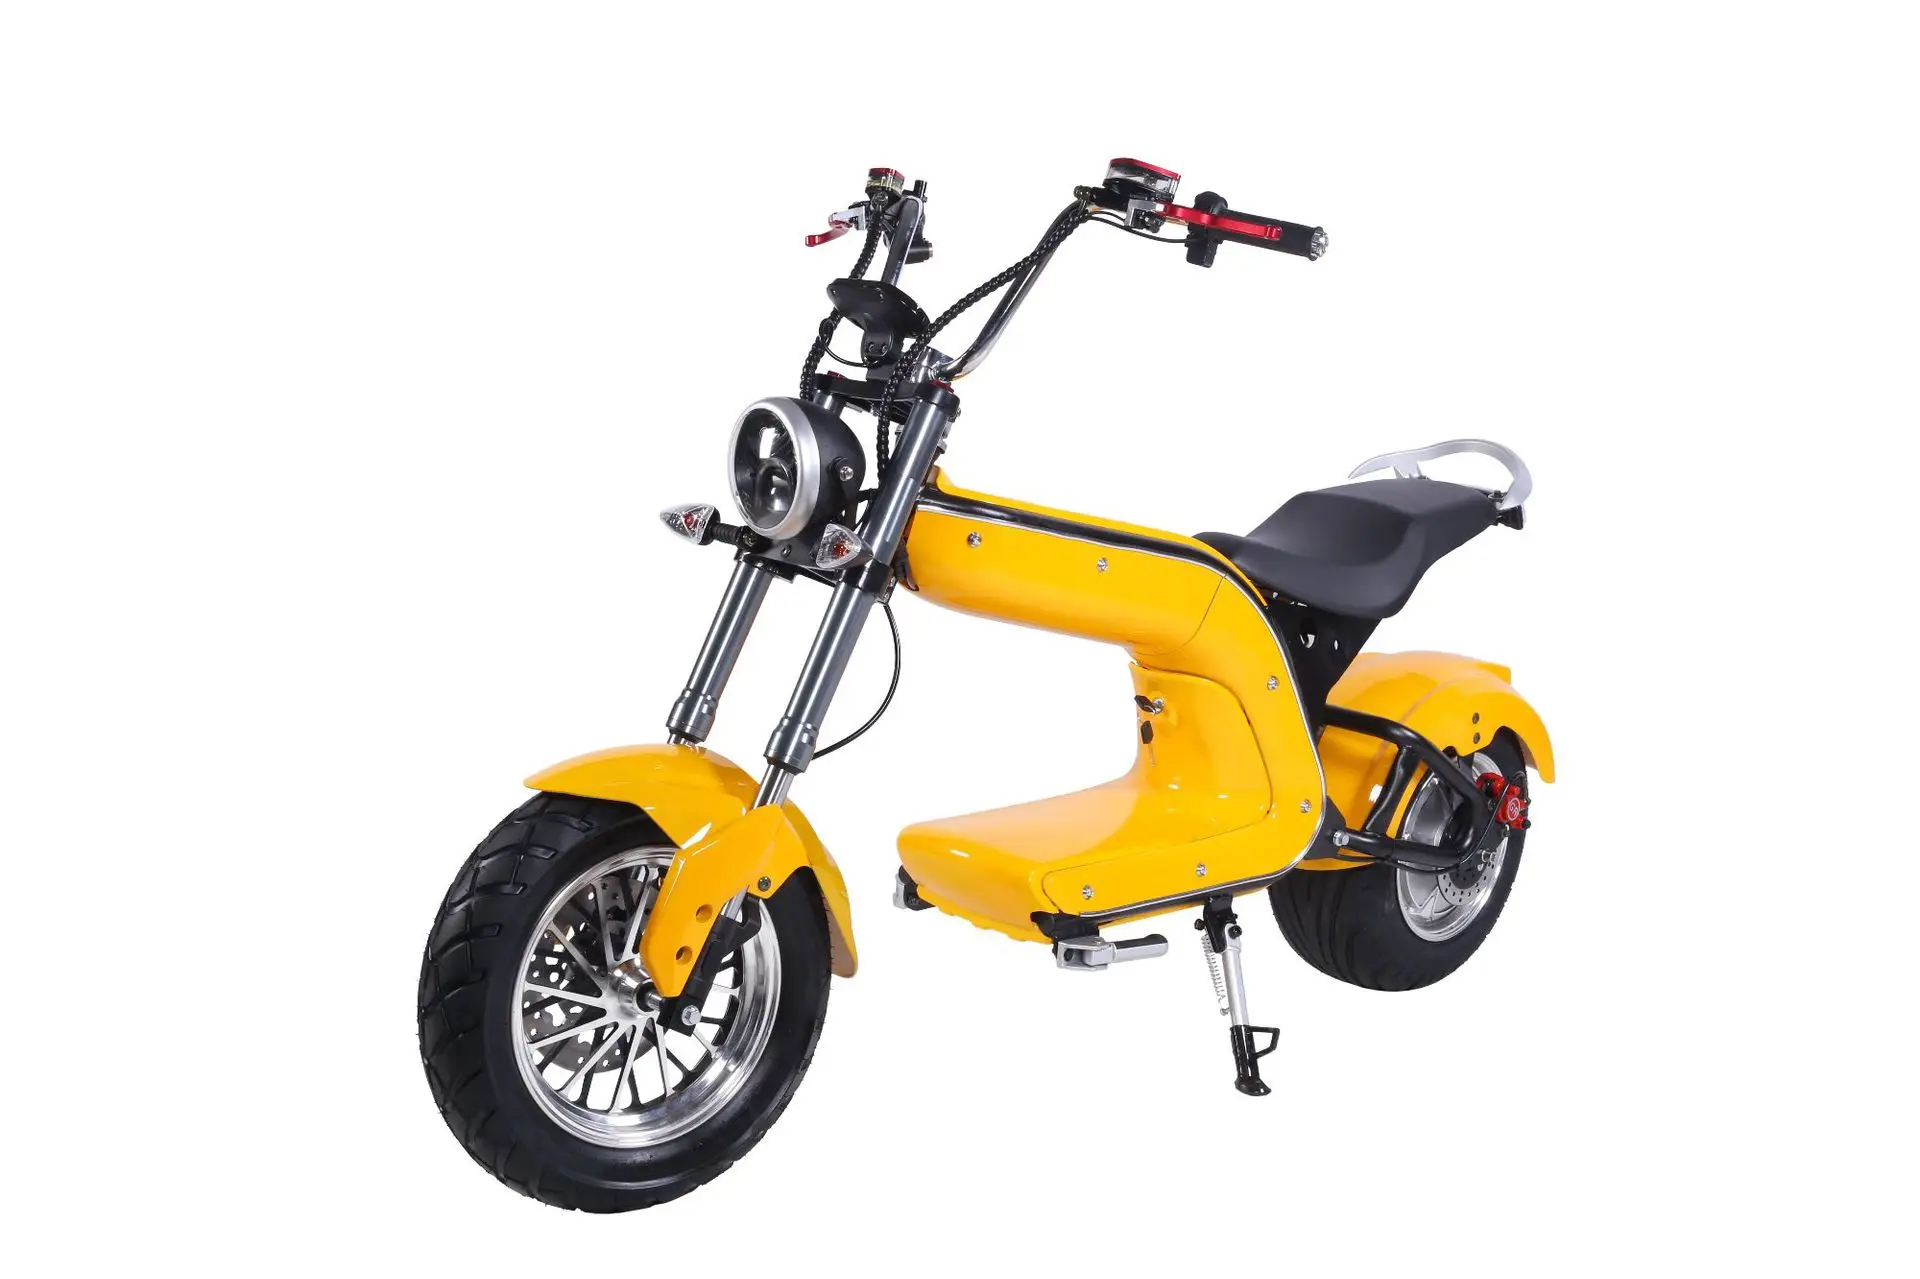 https://ae01.alicdn.com/kf/S52096b1225a84bd4906d888a24c2e0c6S/Electric-Chopper-Electric-Sportsters-Tricycle-City-Coco-Scooter-Bobber-Electric-Scooter.jpg